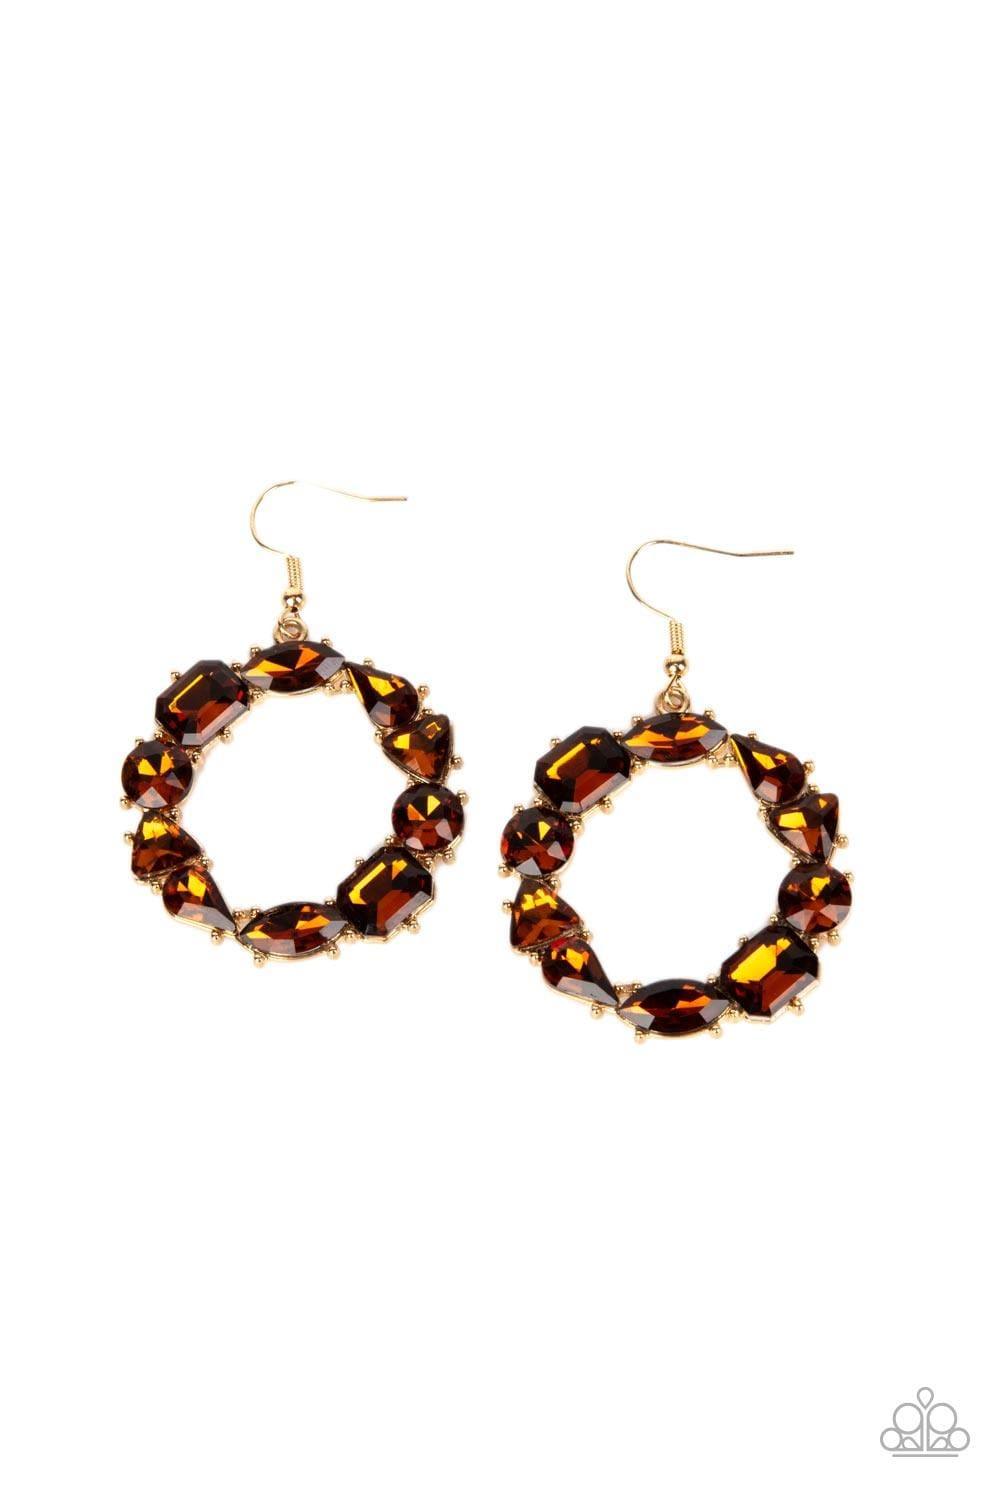 Paparazzi Accessories - Glowing In Circles - Brown Earrings - Bling by JessieK